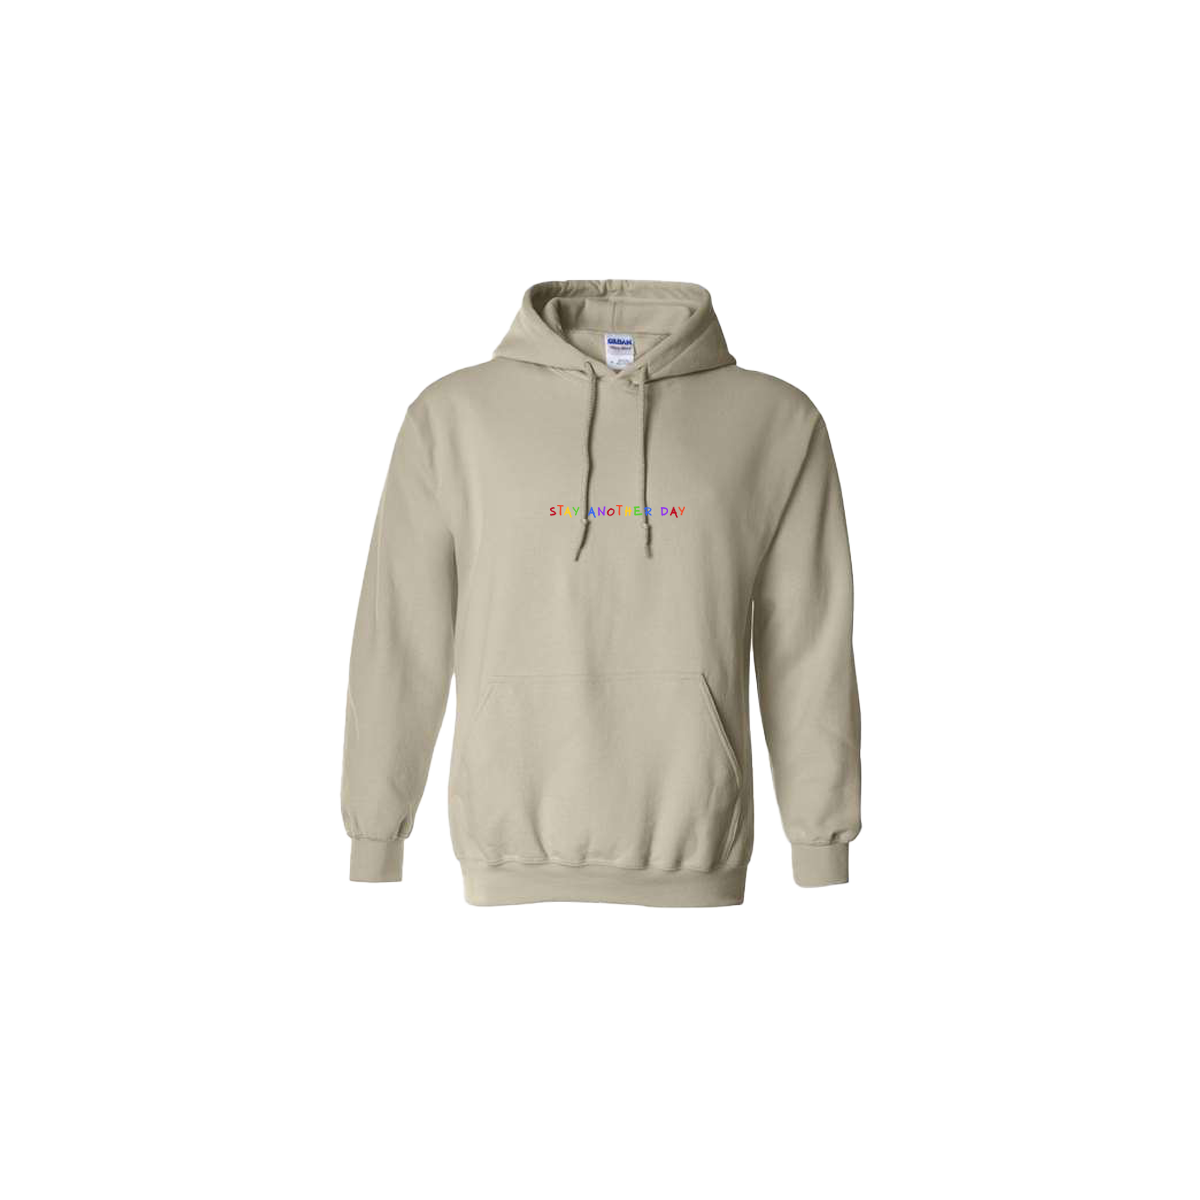 Stay Another Day Rainbow Embroidered Beige Hoodie - Mental Health Awareness Clothing